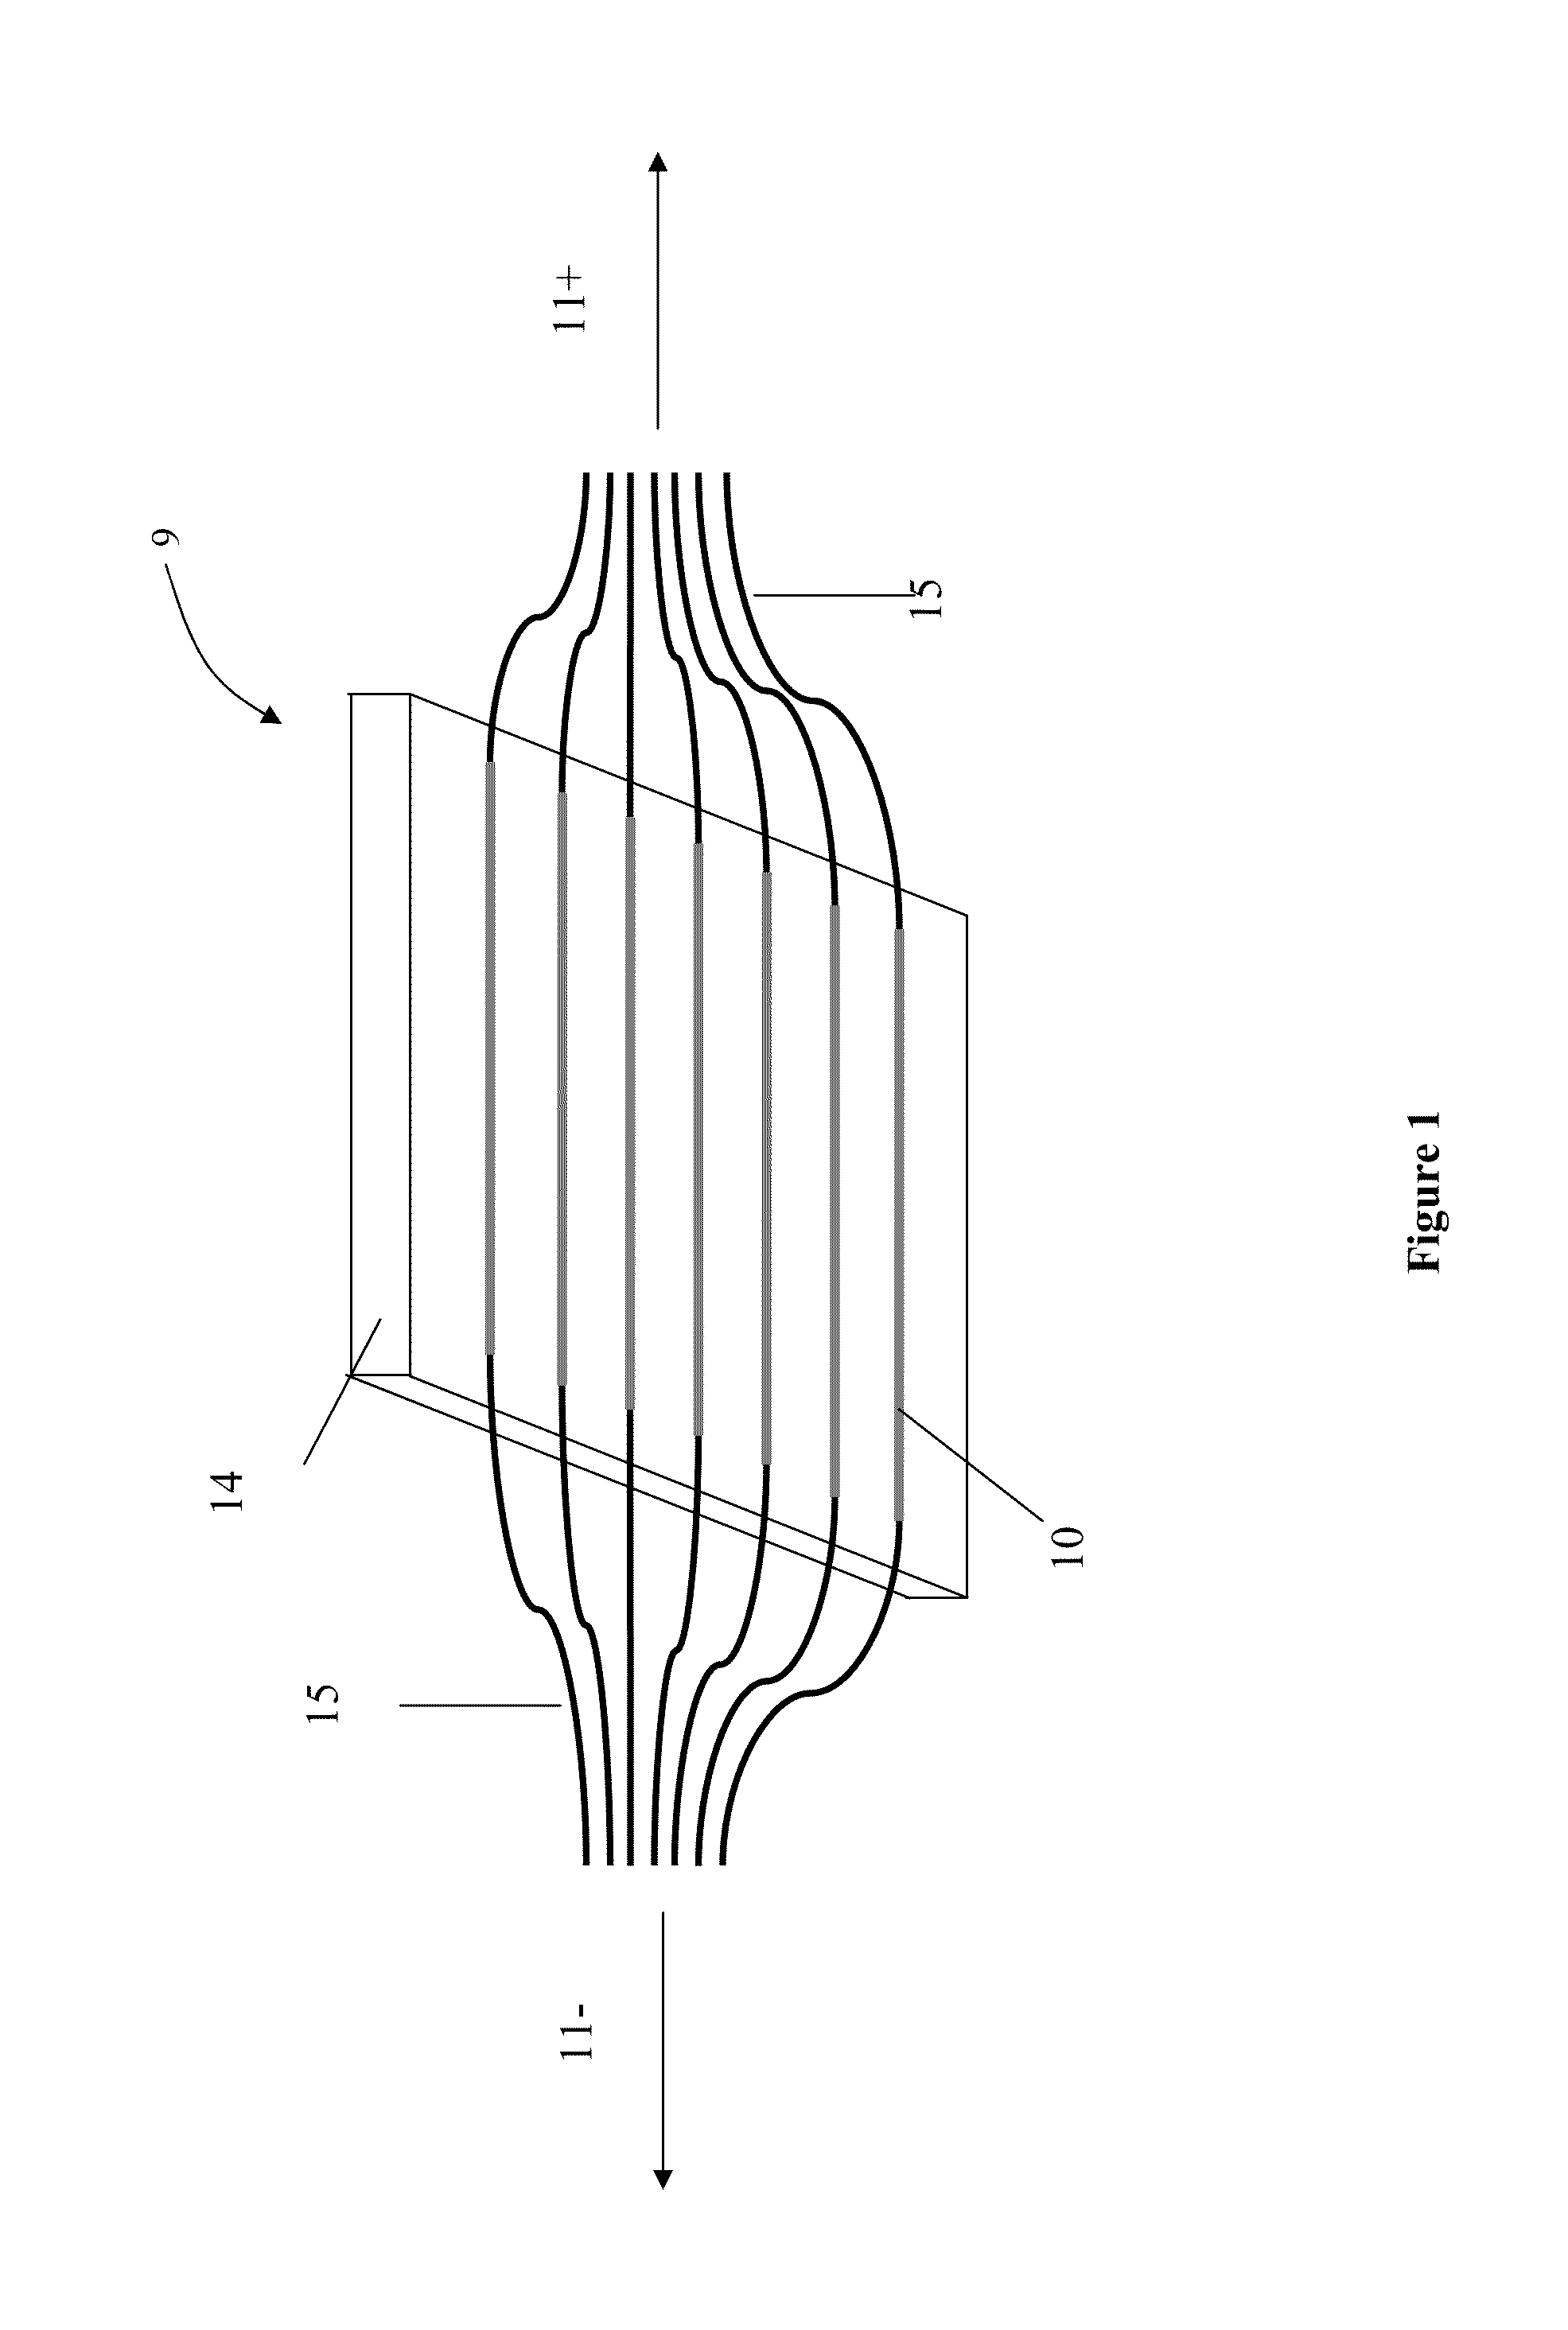 Fluence monitoring devices with scintillating fibers for X-ray radiotherapy treatment and methods for calibration and validation of same